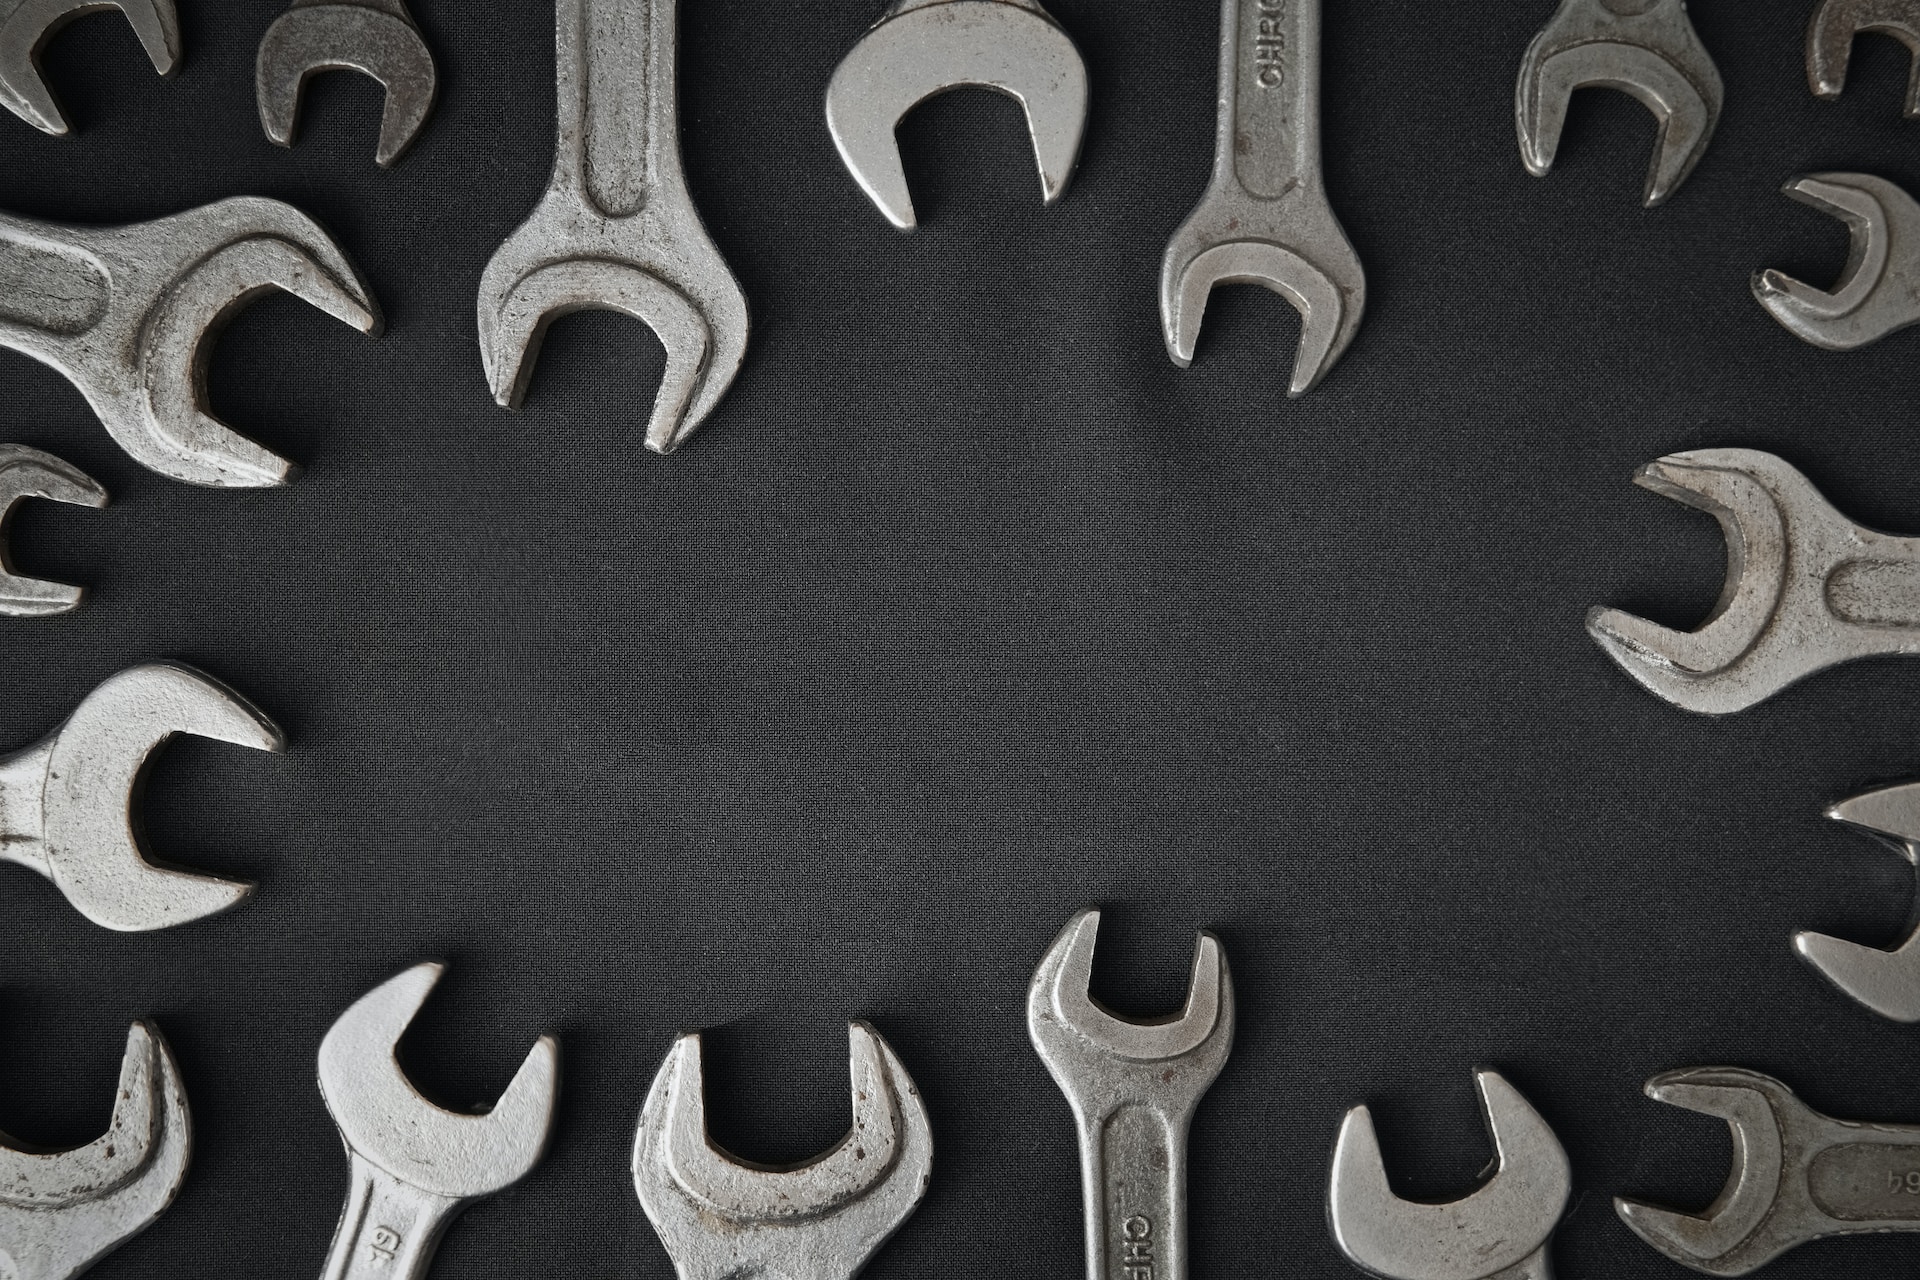 Wrenches on a gray background. The wrenches are arranged around the periphery of the photo.